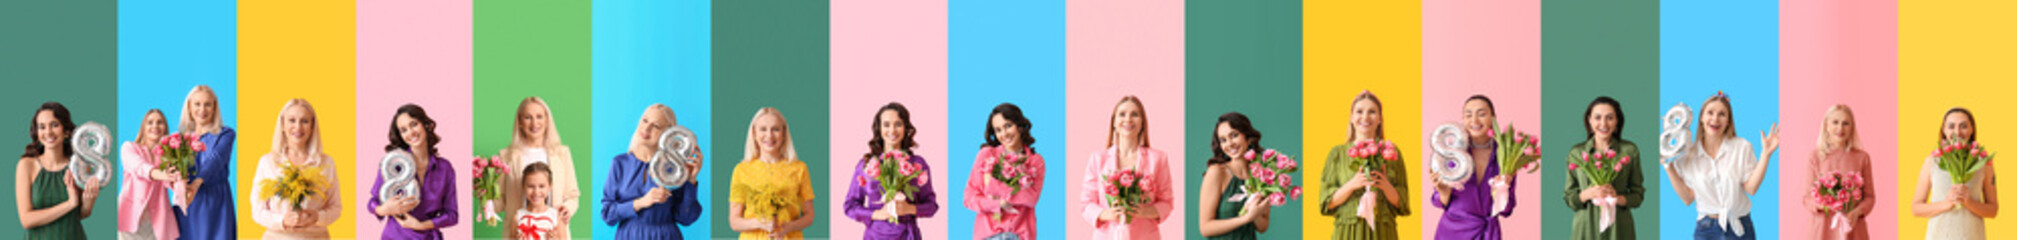 Wall Mural - Group of women with bouquets of flowers and balloons in shape of figure 8 on color background. International Women's Day celebration